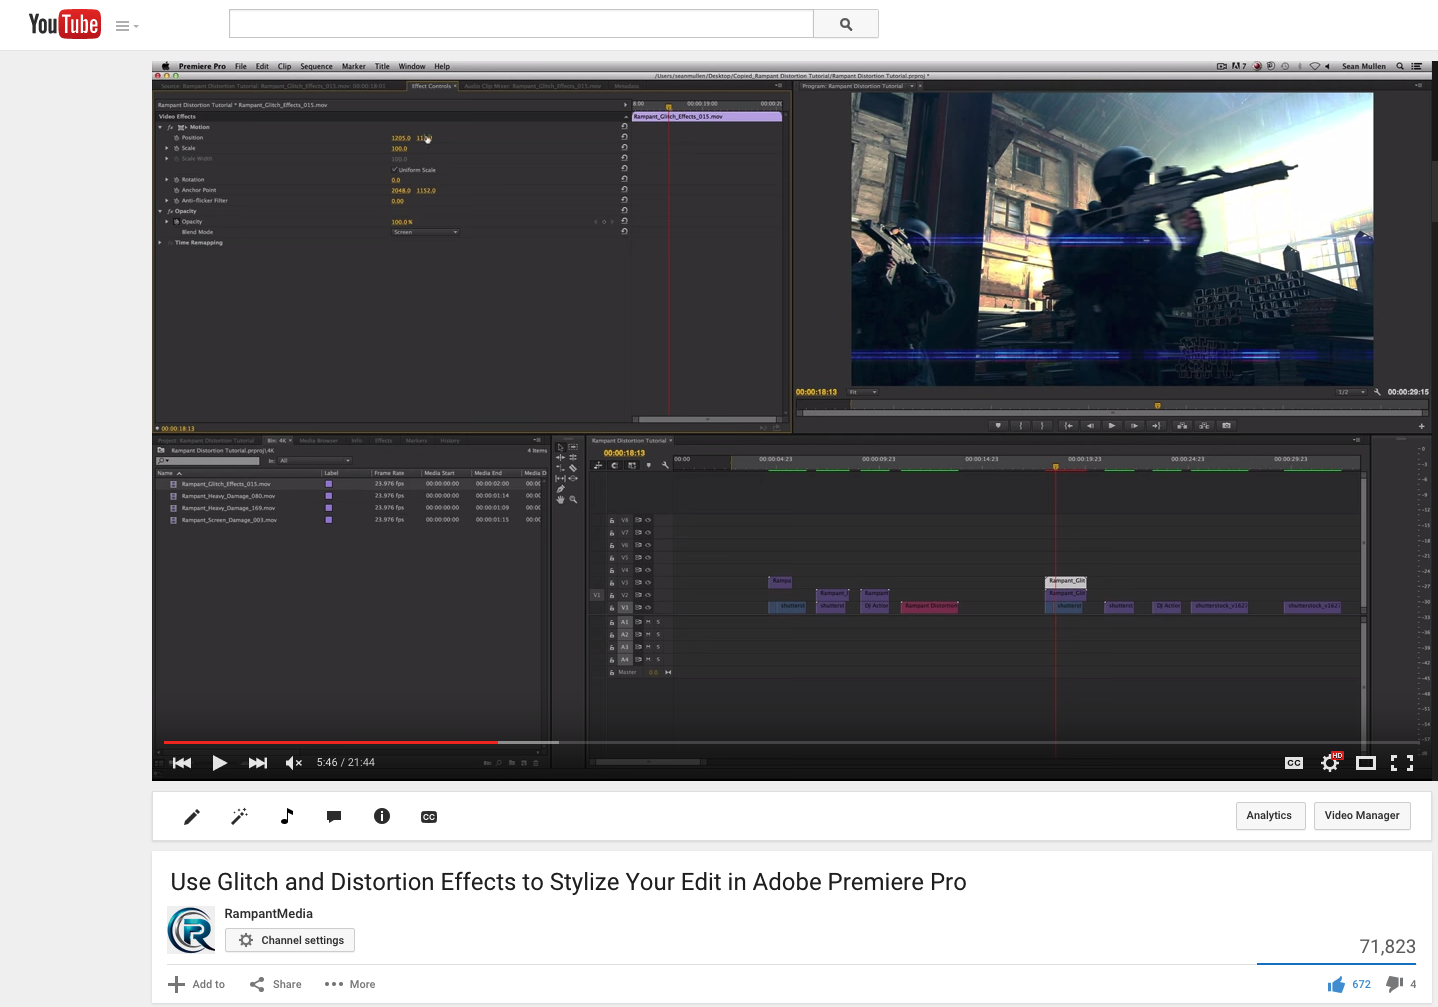 Use Glitch and Distortion Effects to Stylize Your Edit in Adobe Premiere Pro